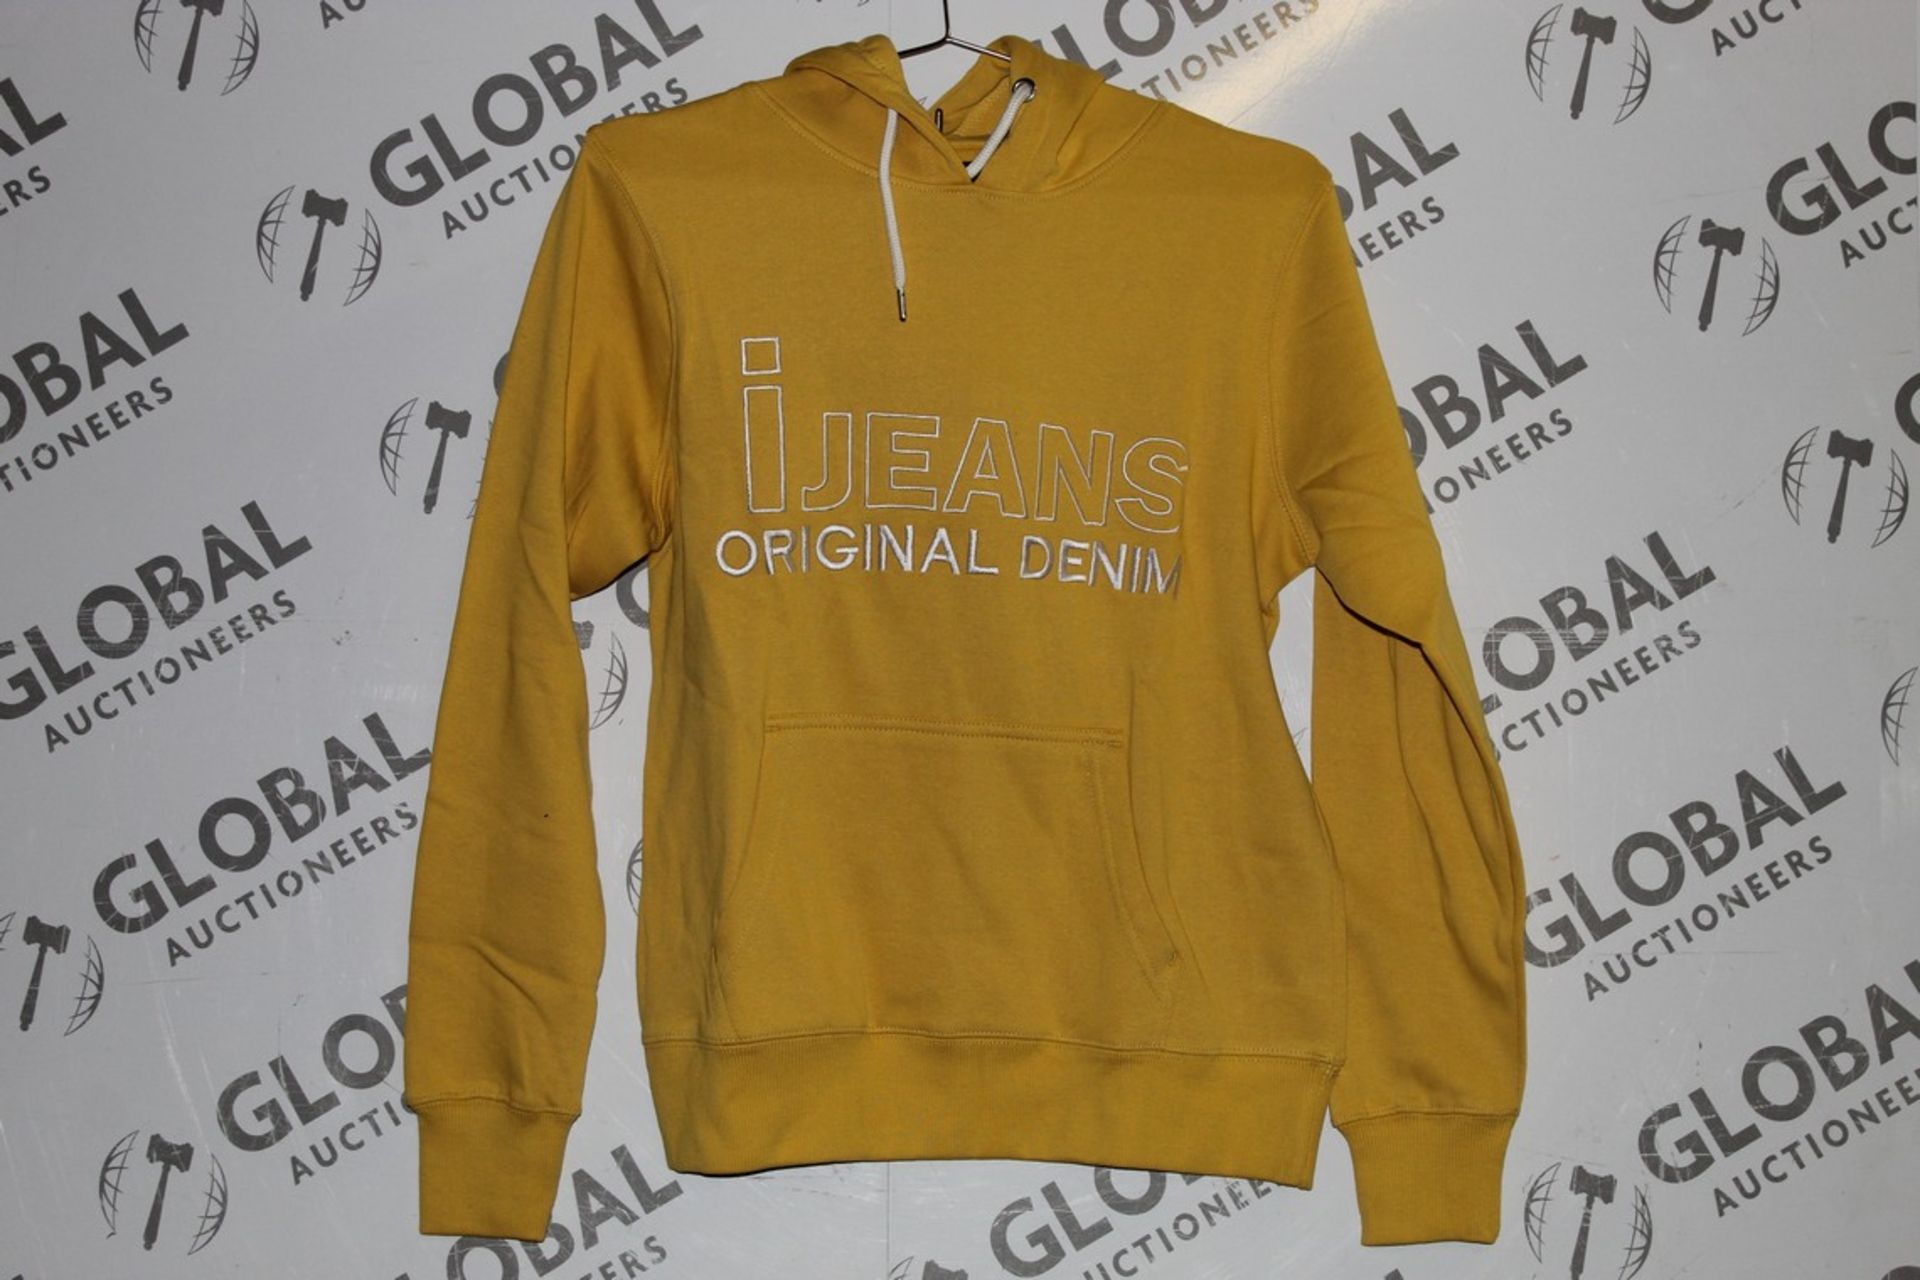 Lot to Contain 30 Brand New Ijeans Original Denim Unisex Hooded Tops RRP £29.99 Each Combined RRP £